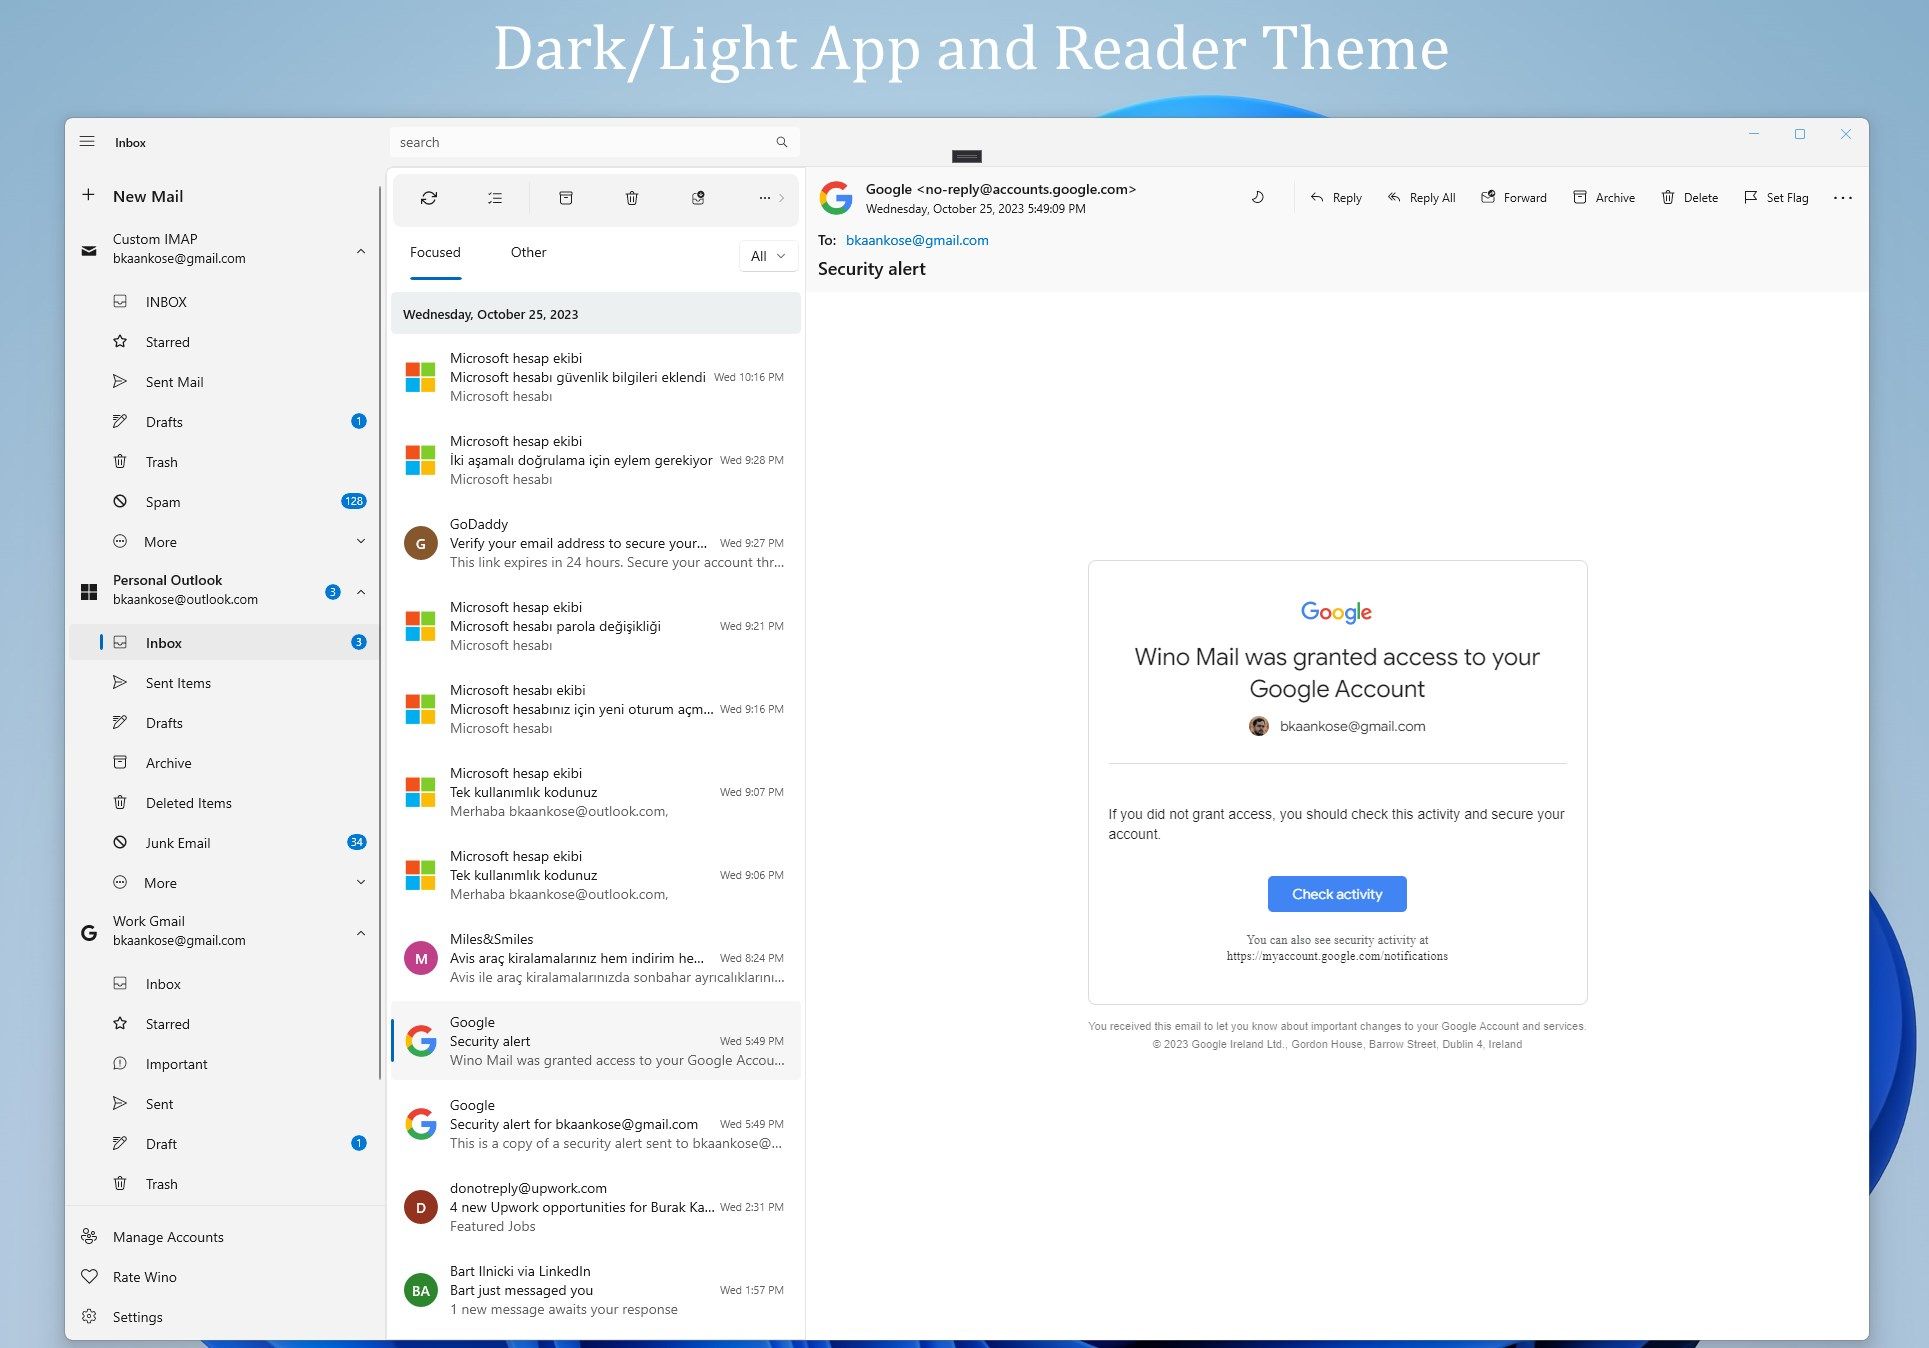 Dark/light app and reader theme compatibility.